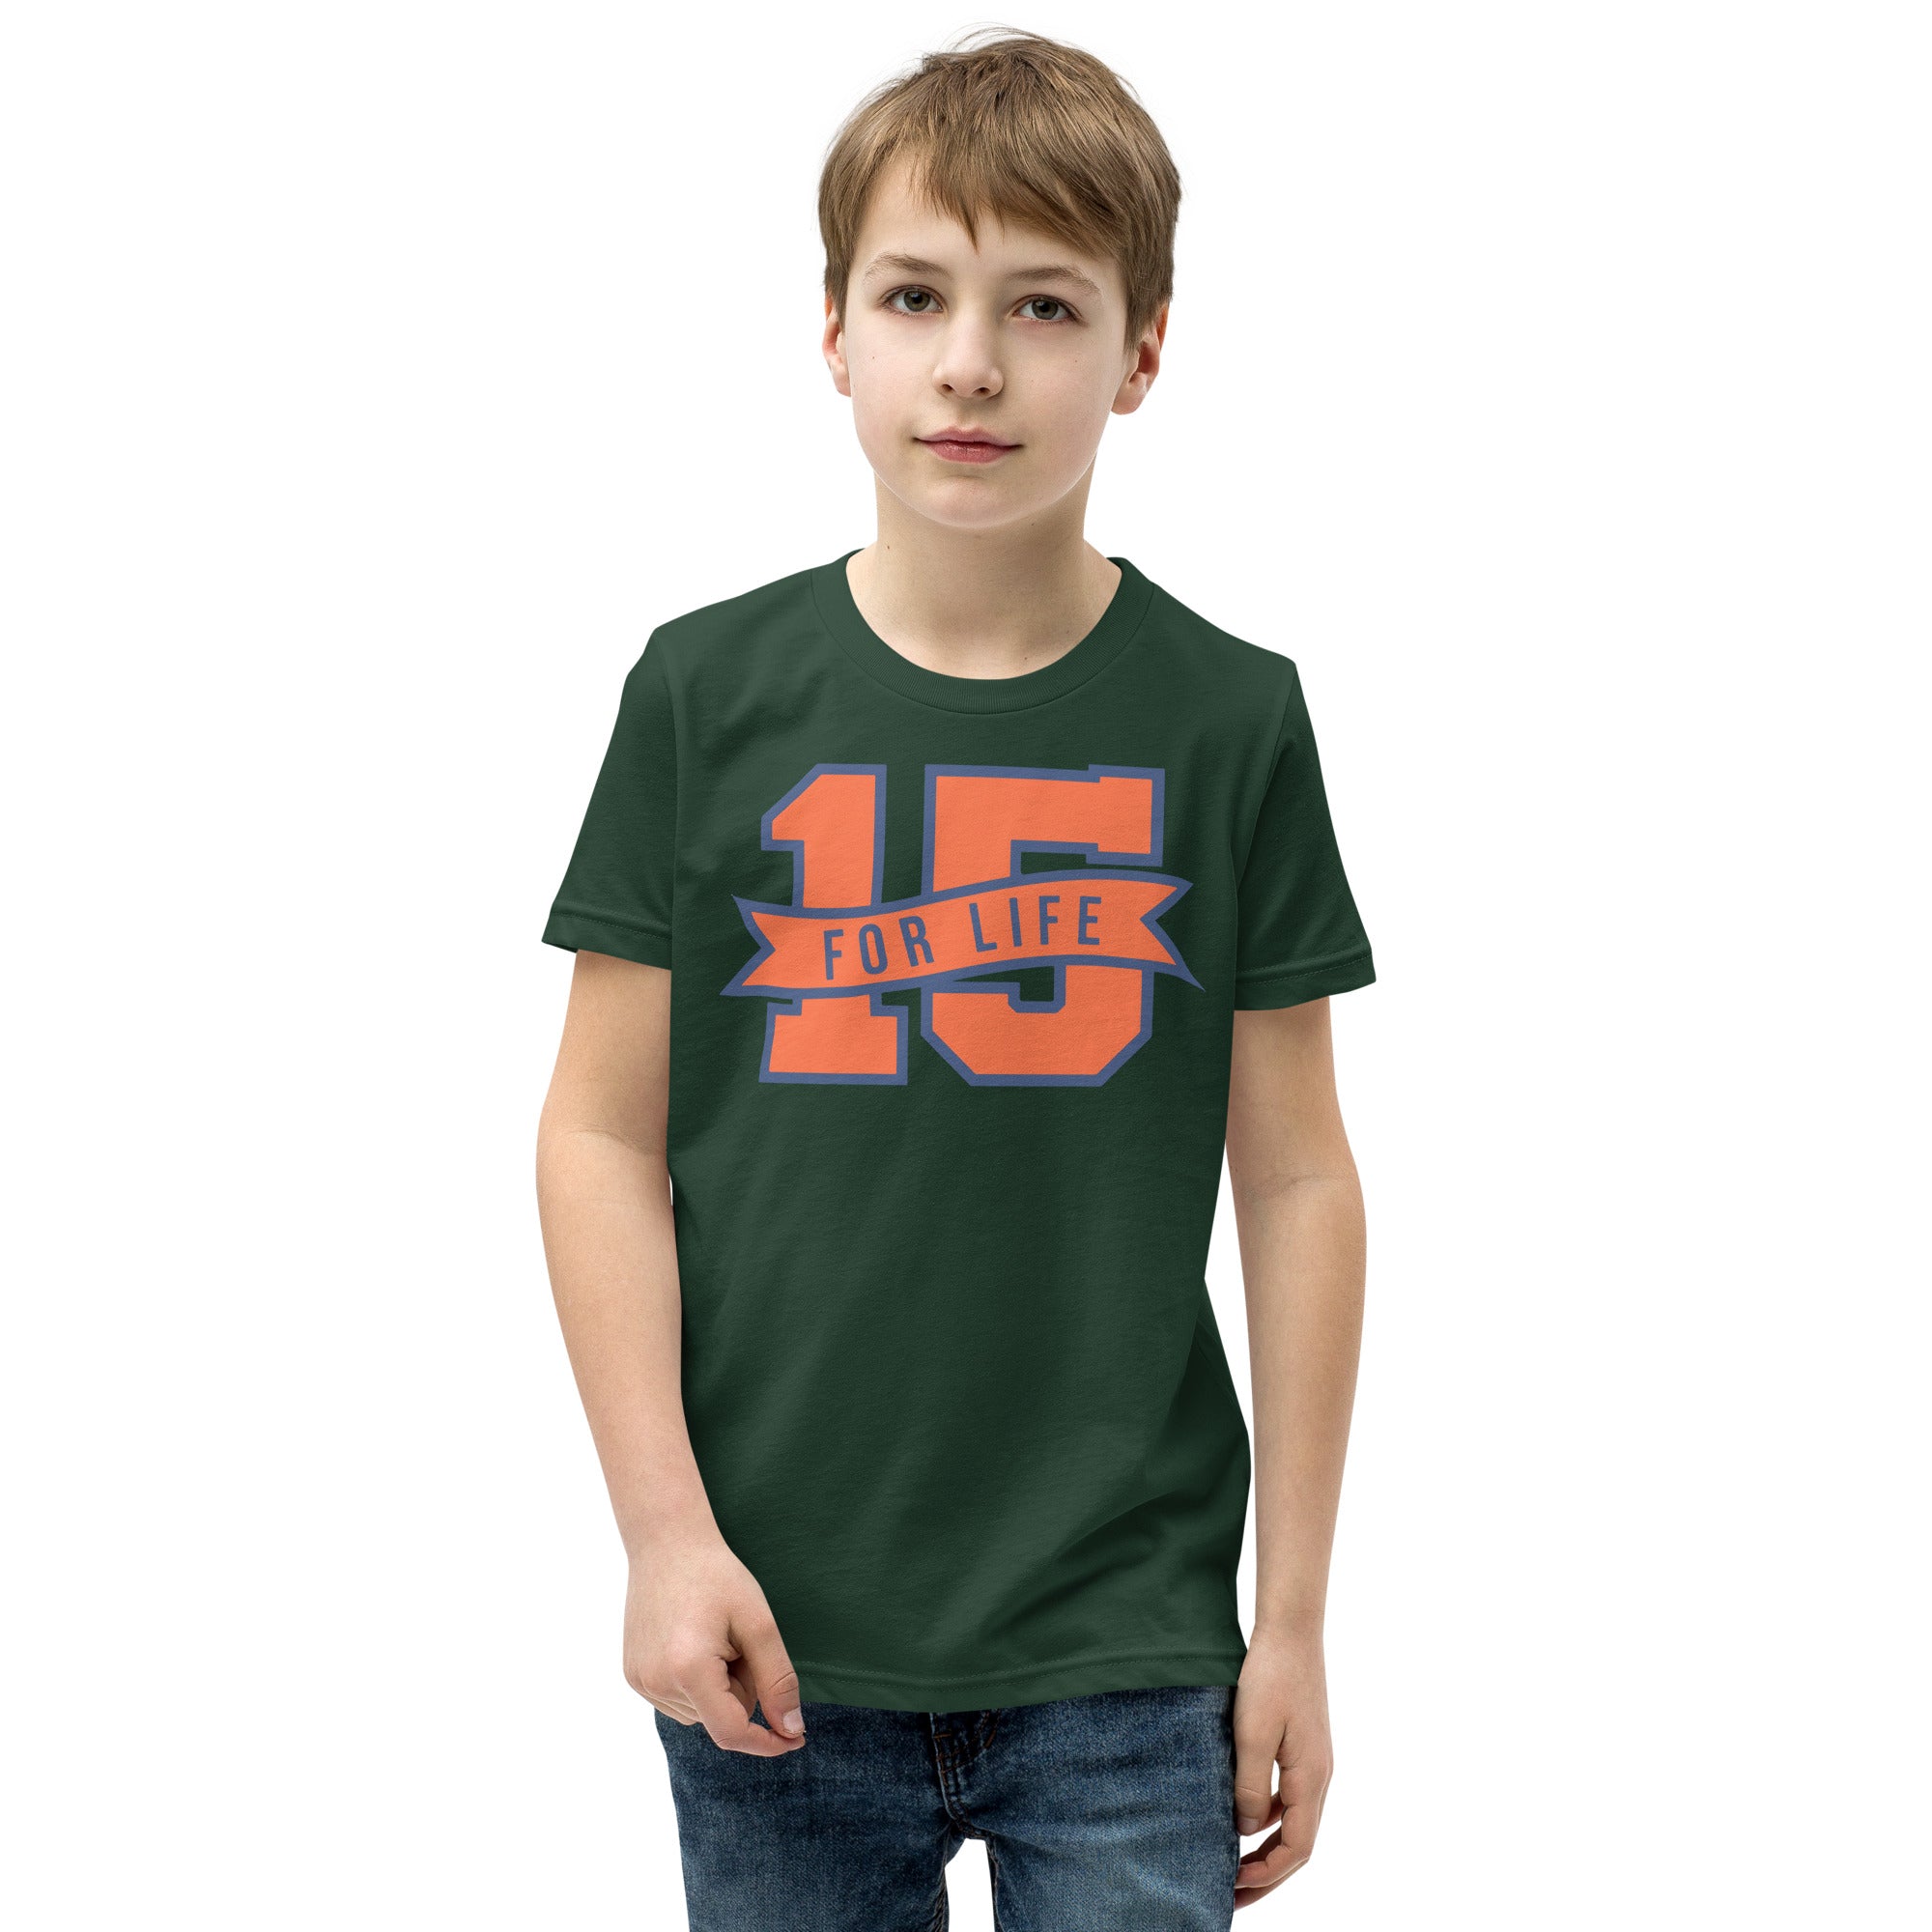 15 For Life Youth T-Shirt